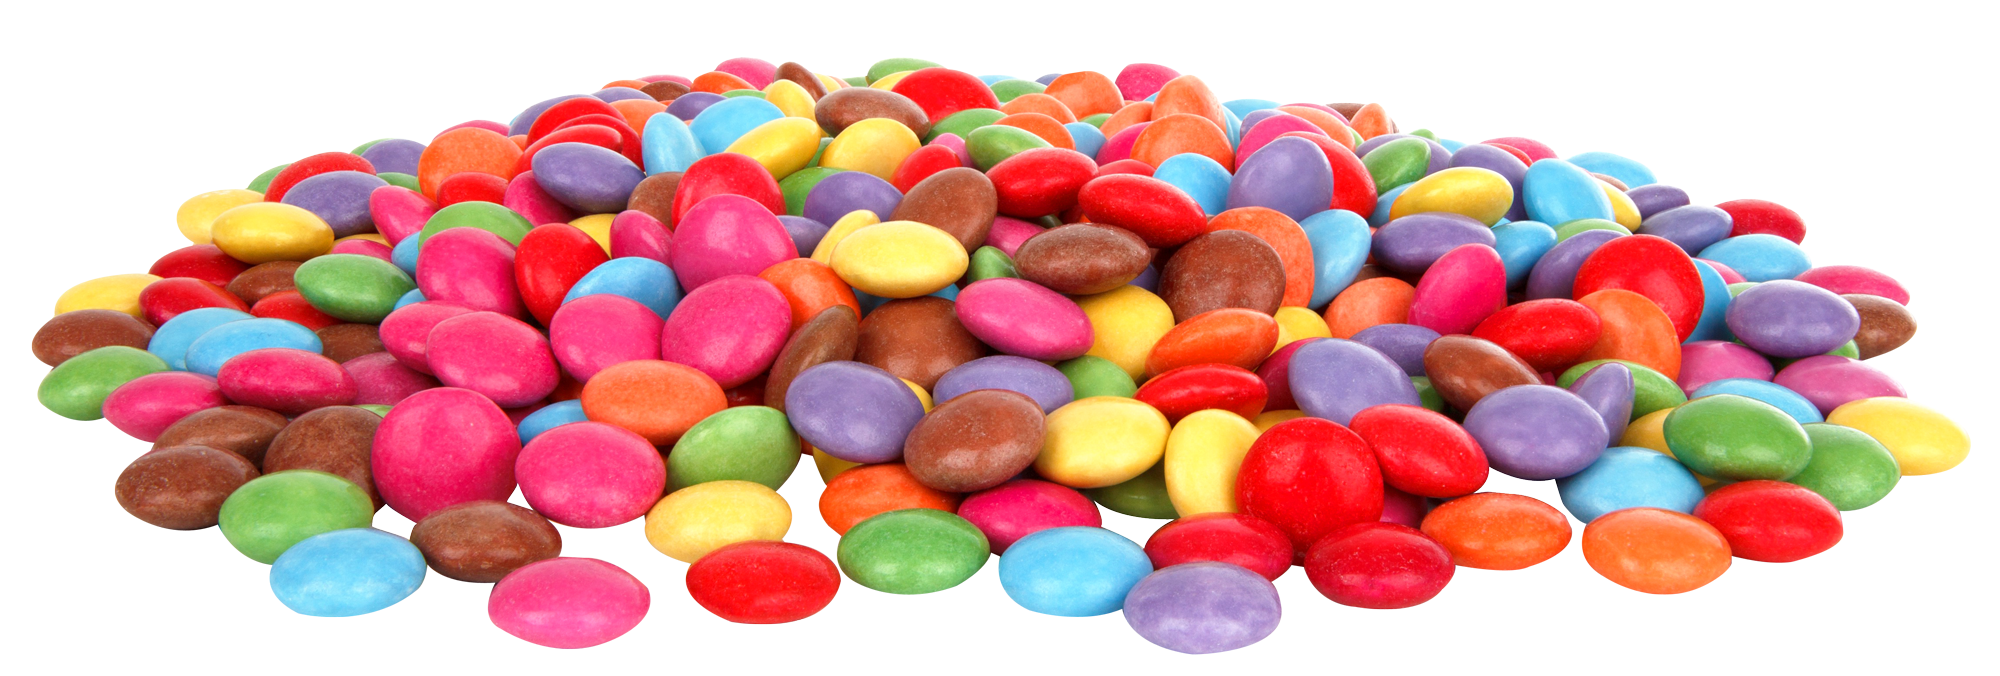 Candy Png Hdpng.com 2000 - Candy, Transparent background PNG HD thumbnail